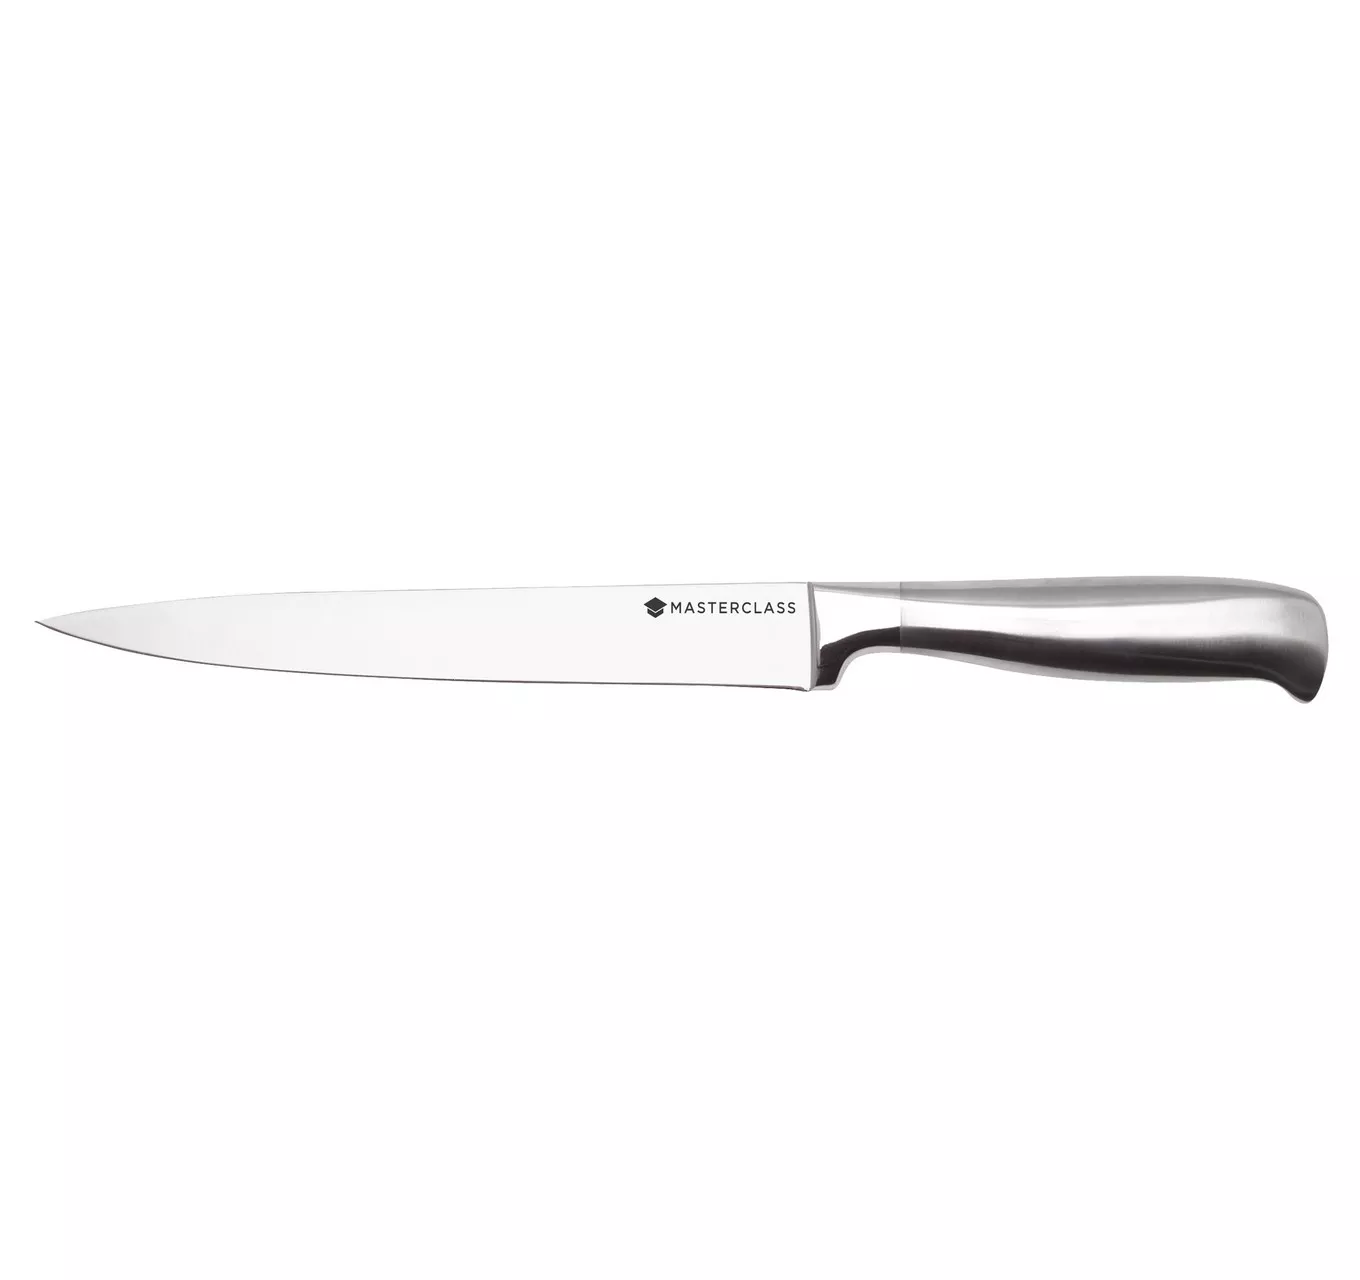 Deluxe Carving Knife 20cm